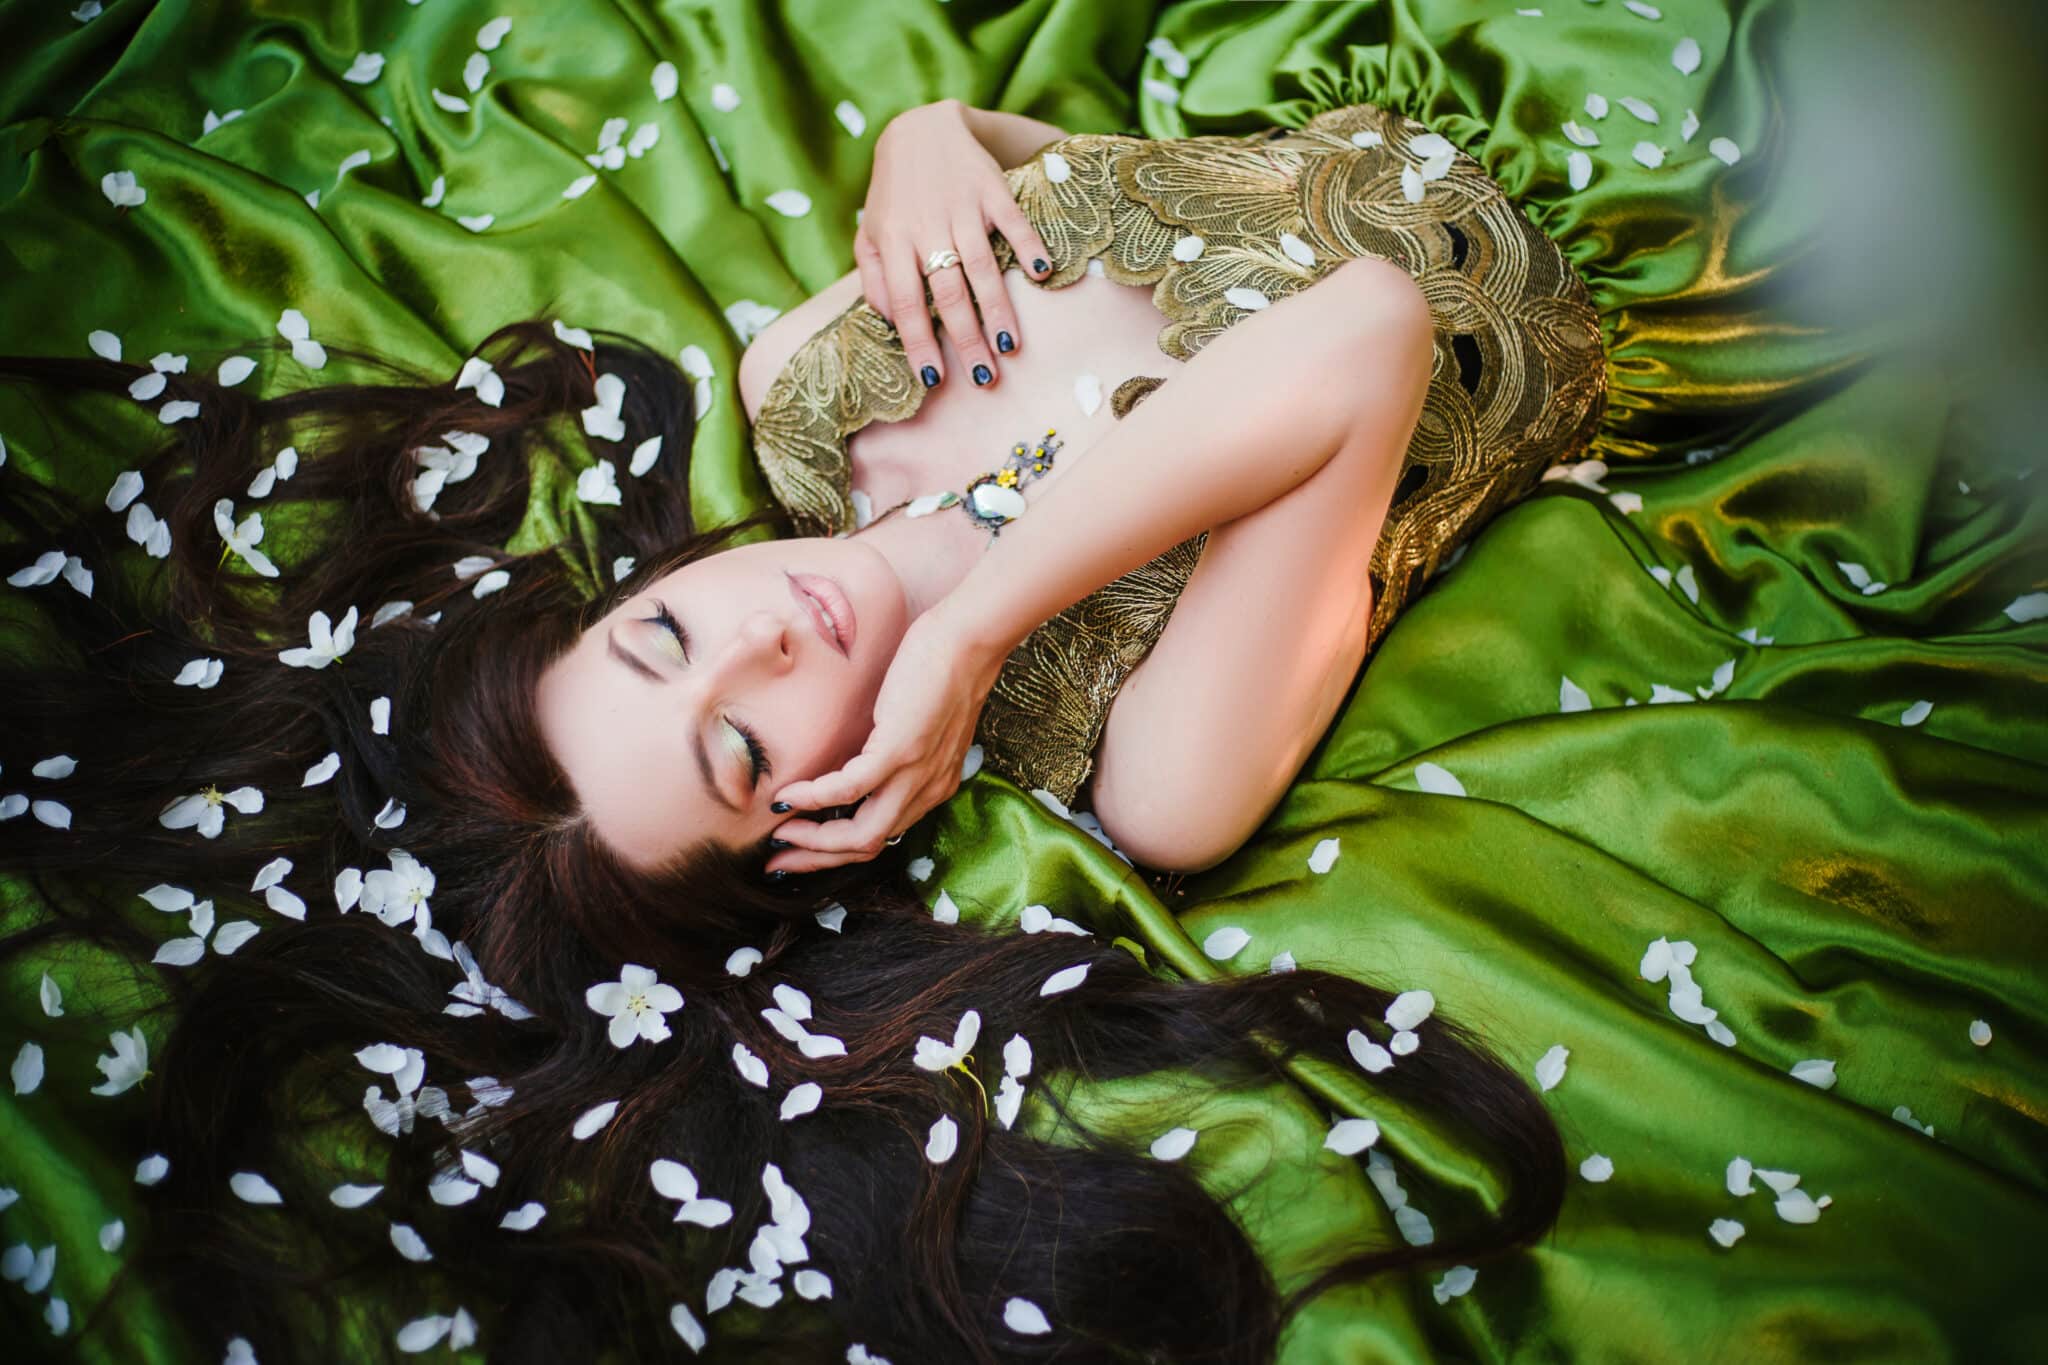 A beautiful young woman in a green dress lies on a train among the white petals of an apple tree.